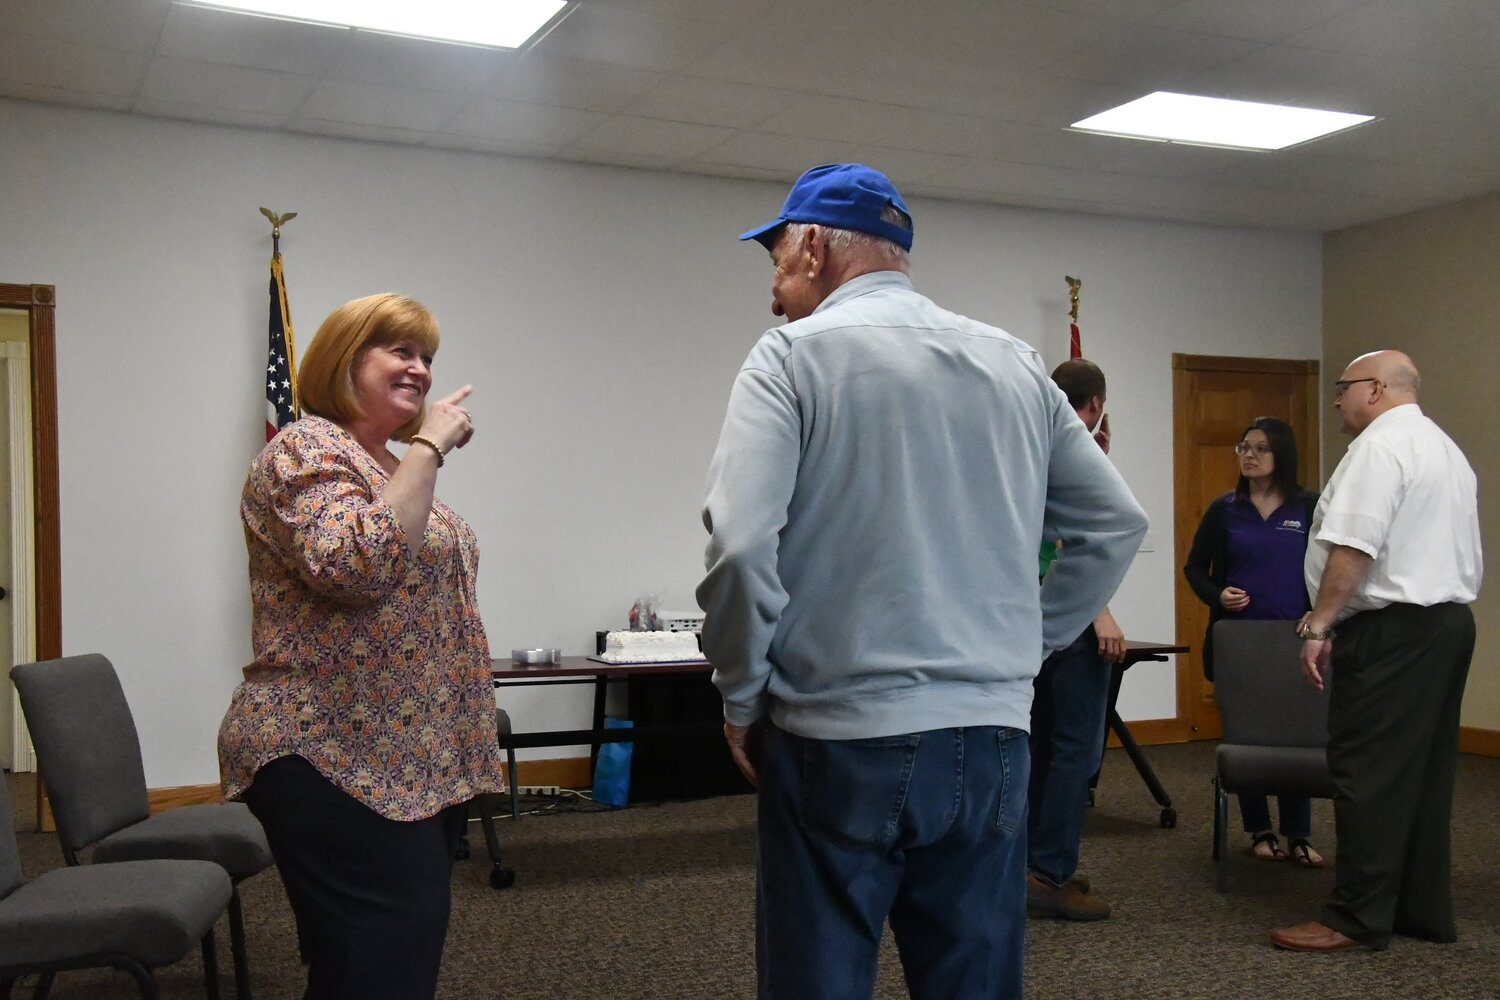 Pam Kertz, a former administrative assistant with the Moberly Parks and Recreation Department office, shares a moment with Jerry Calvin during a meet-and-greet at city offices on Friday, May 12. (Photo by Eric Viccaro)